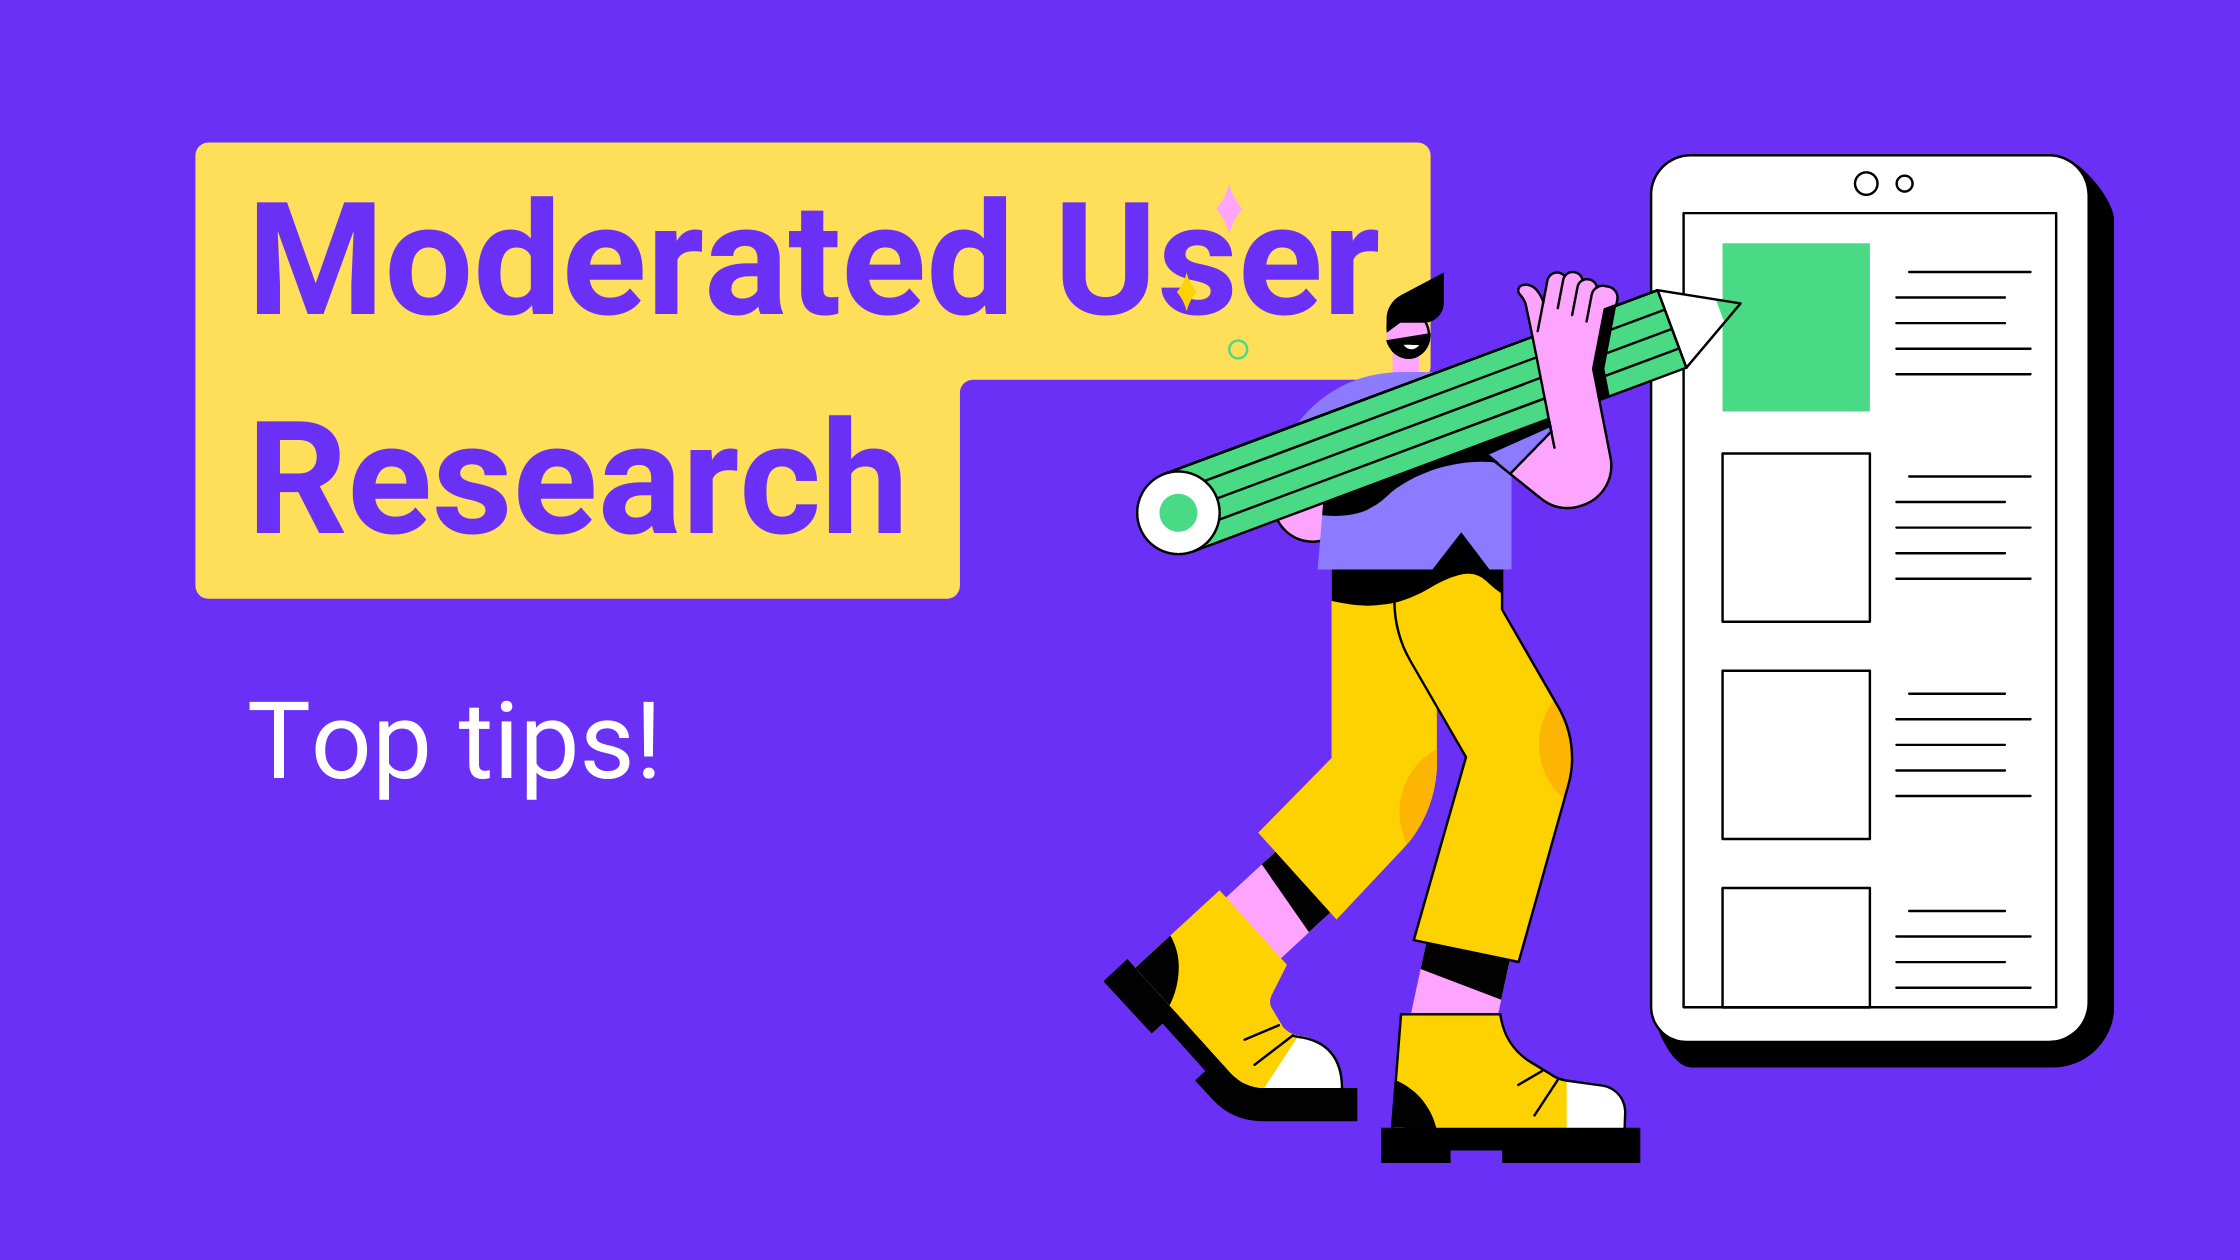 Moderated User Research